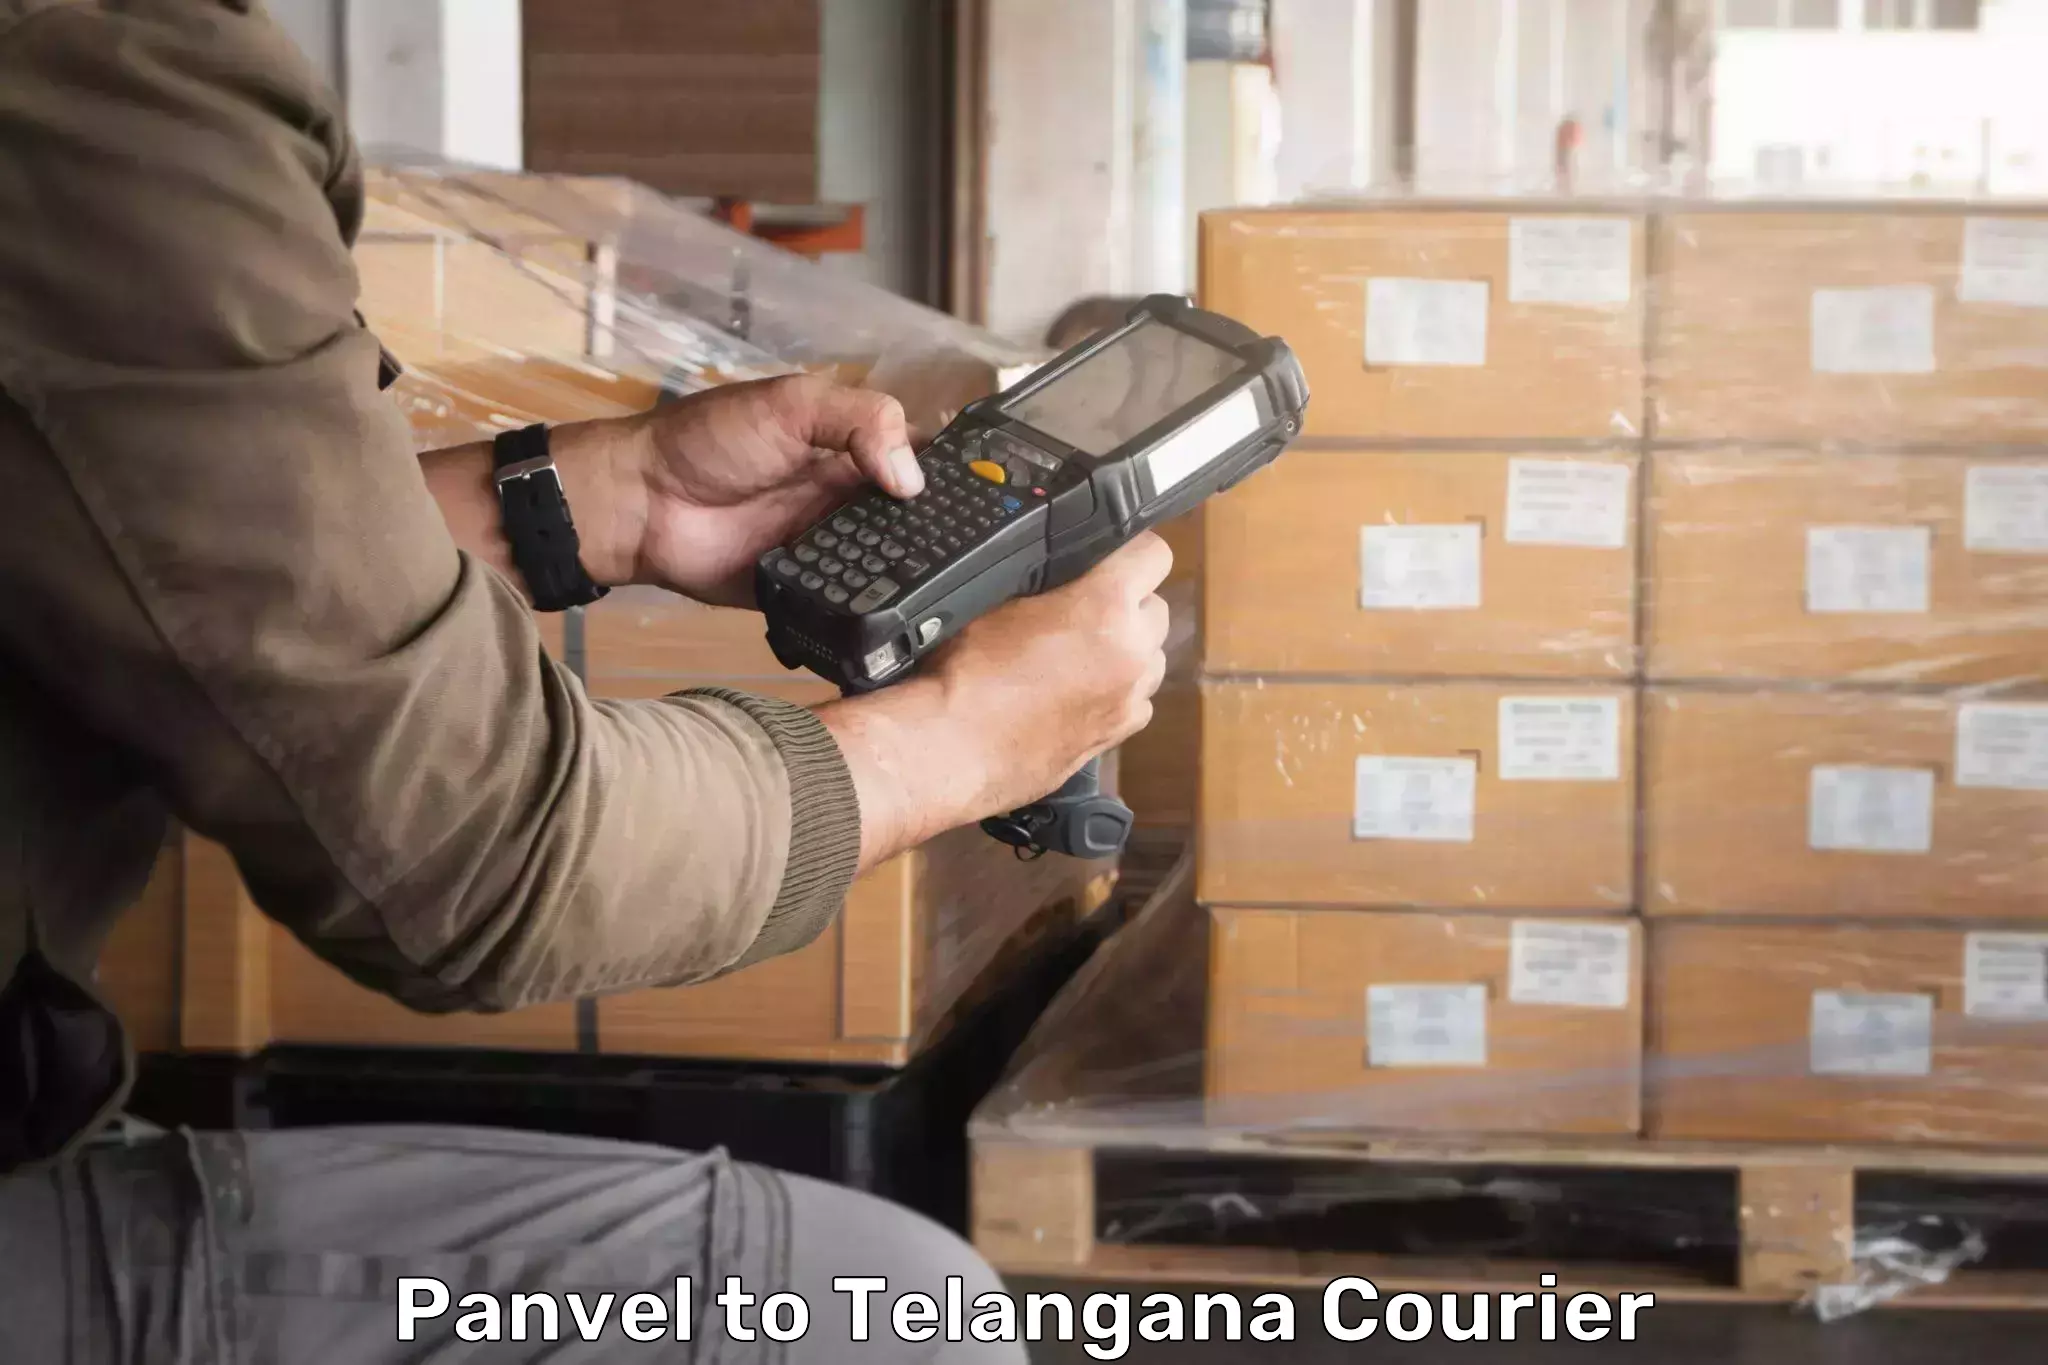 Domestic courier Panvel to Telangana